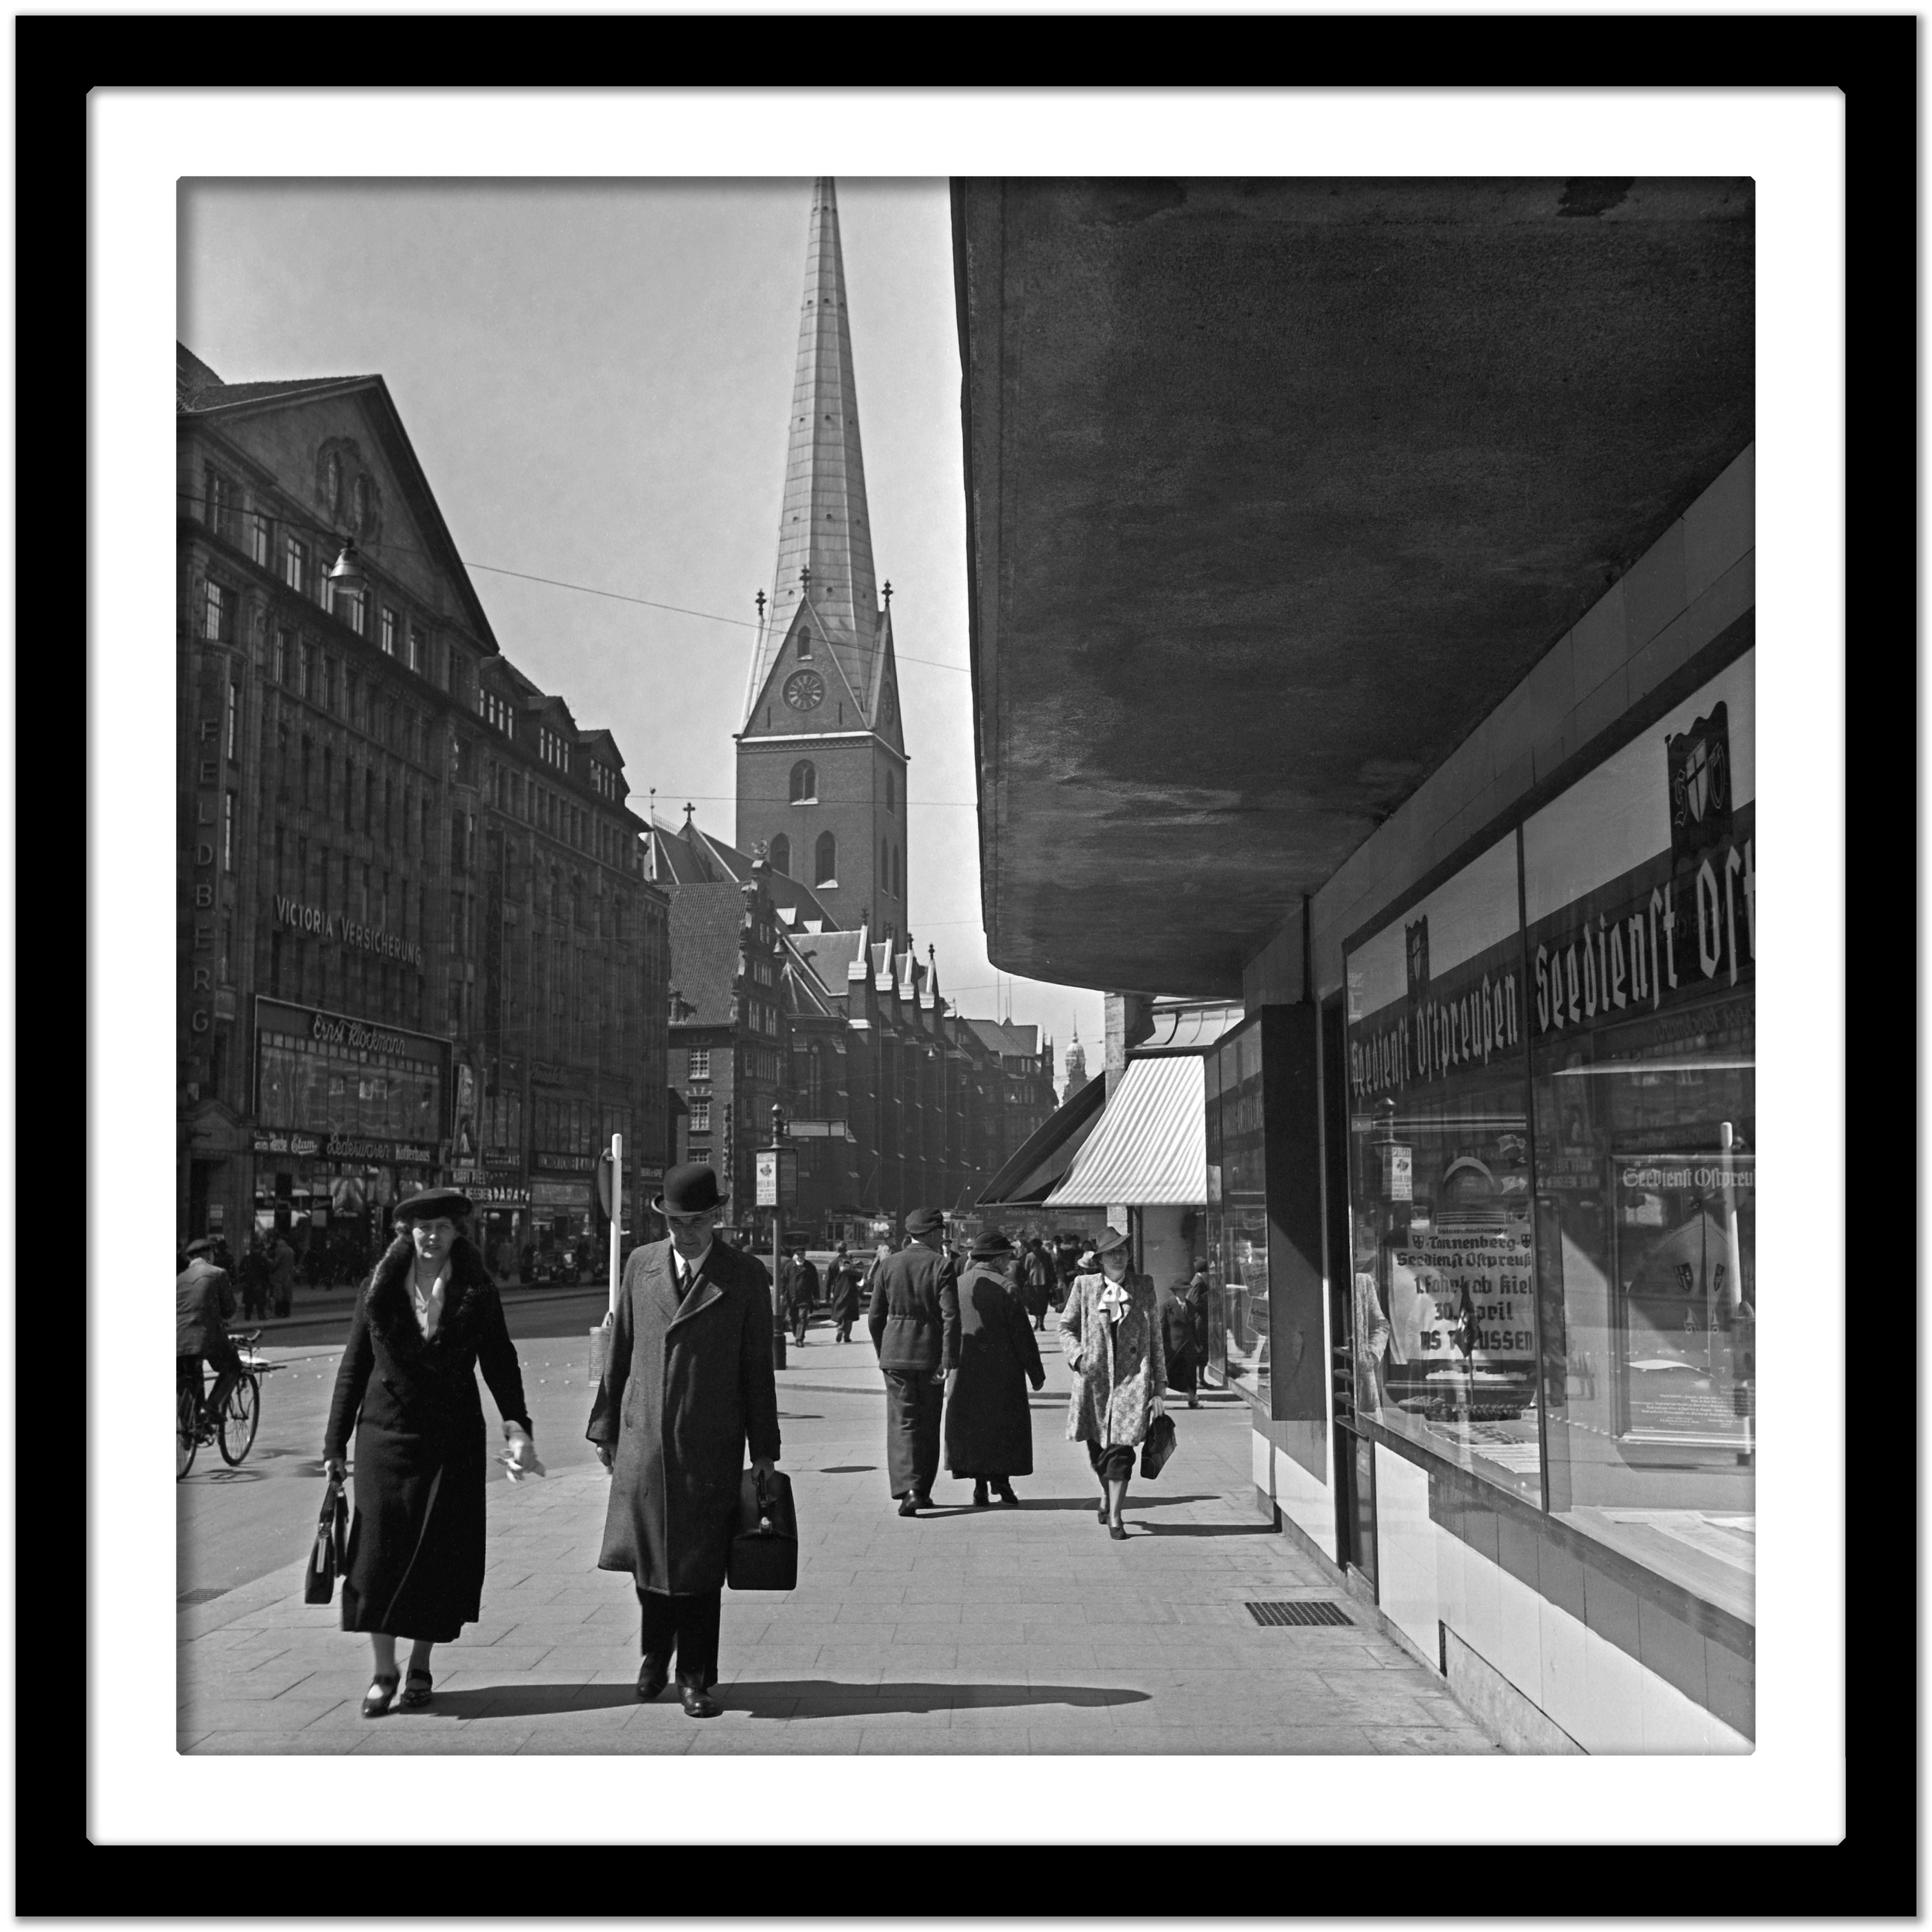 Moenckebergstrasse at Hamburg with passers by, Germany 1938 Printed Later  - Modern Photograph by Karl Heinrich Lämmel